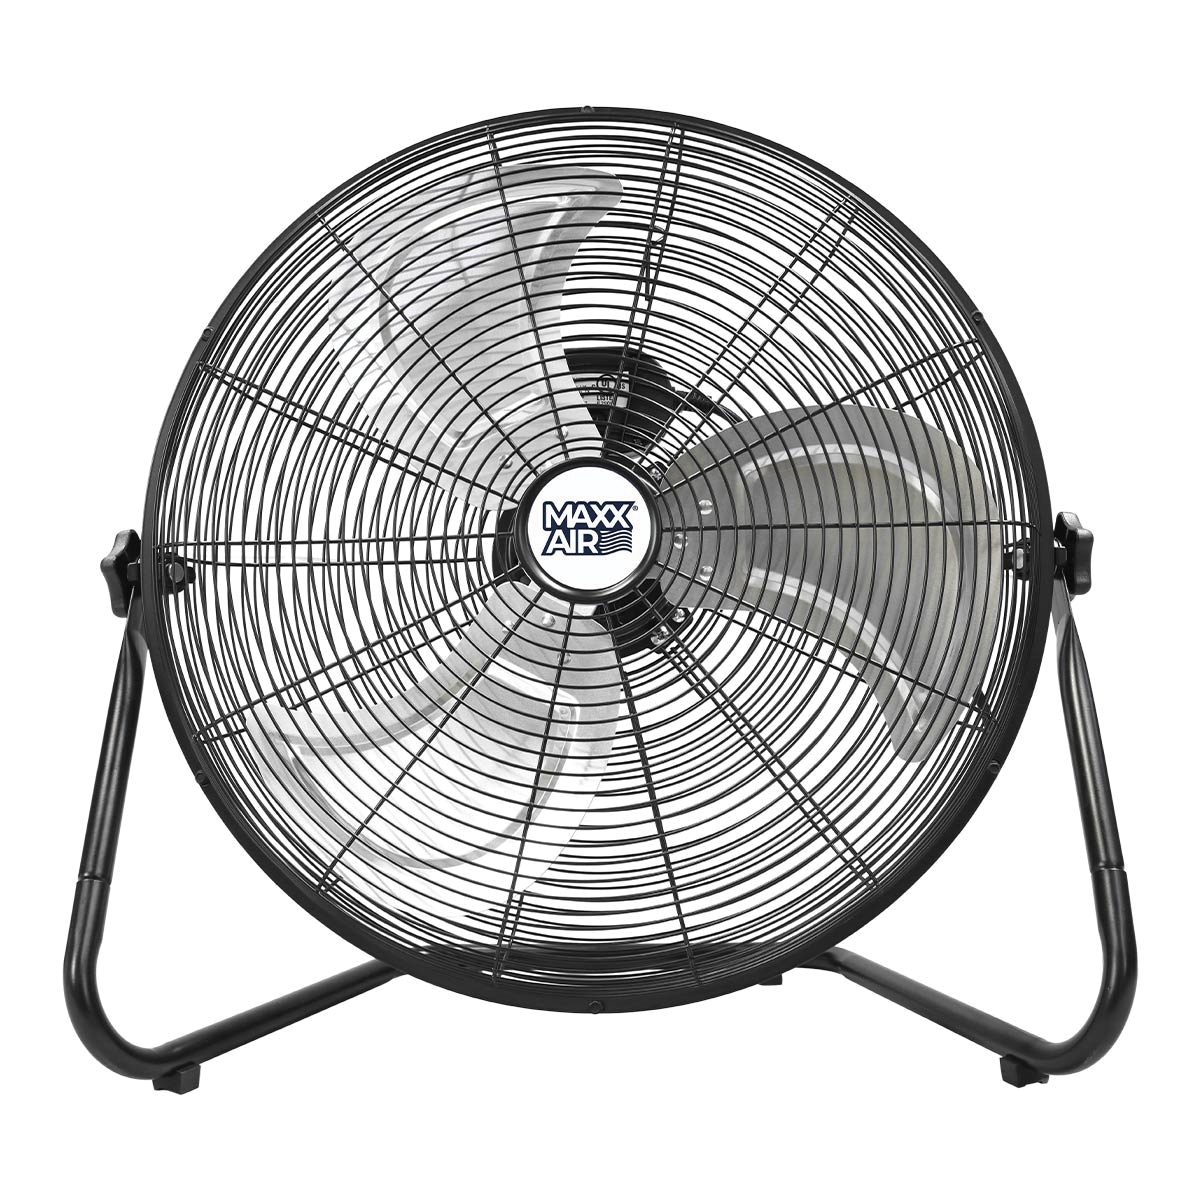 HVFF 20 High-Velocity Floor Fan, 120 V, 20 in Dia Blade, 3-Speed, 1500 to 2250 cfm Air, Black